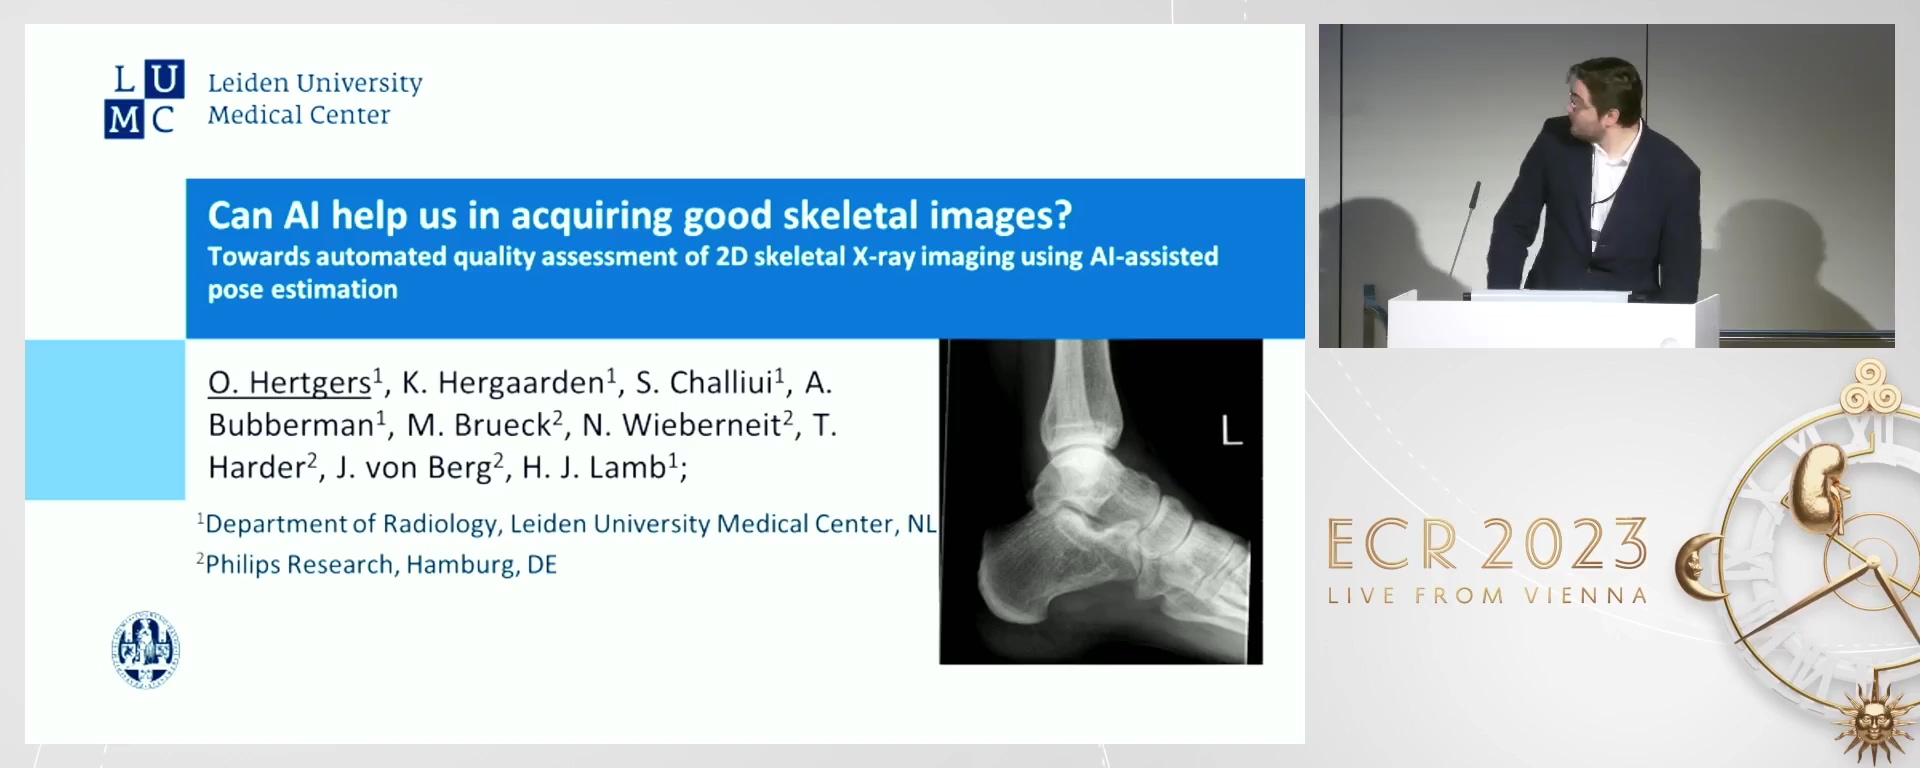 Can AI help us in acquiring good skeletal images? Towards automated quality assessment of 2D skeletal X-ray imaging using AI-assisted pose estimation